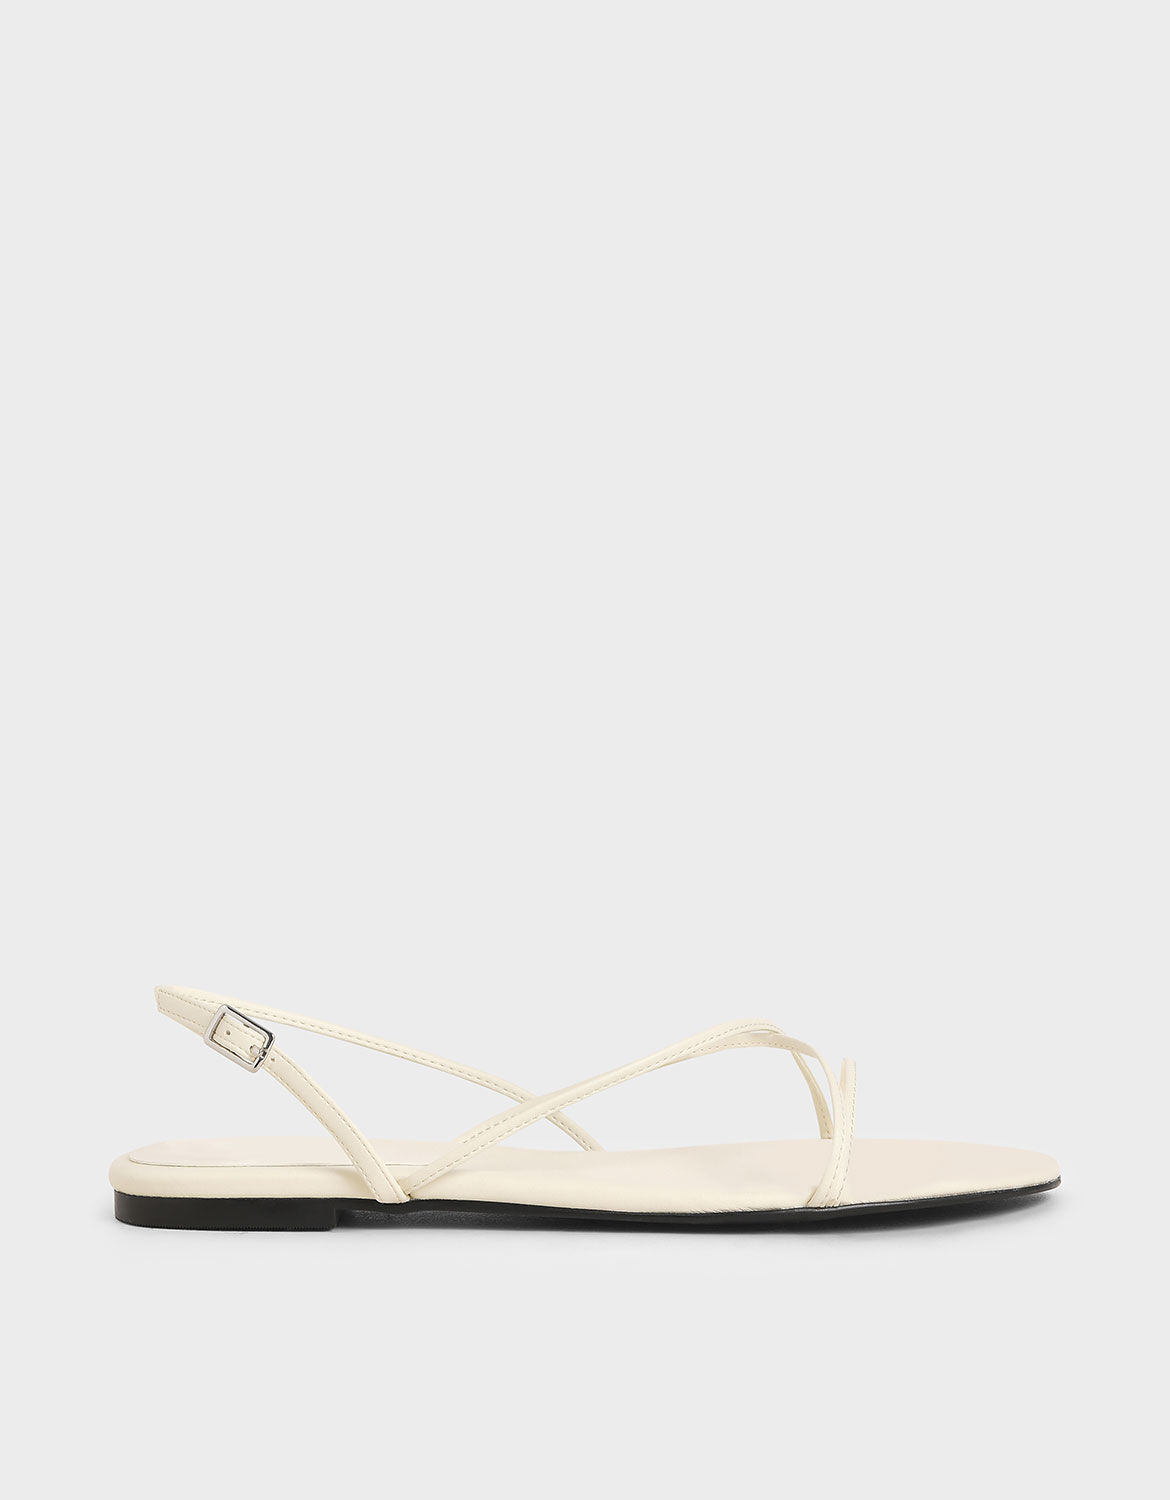 charles and keith flip flops